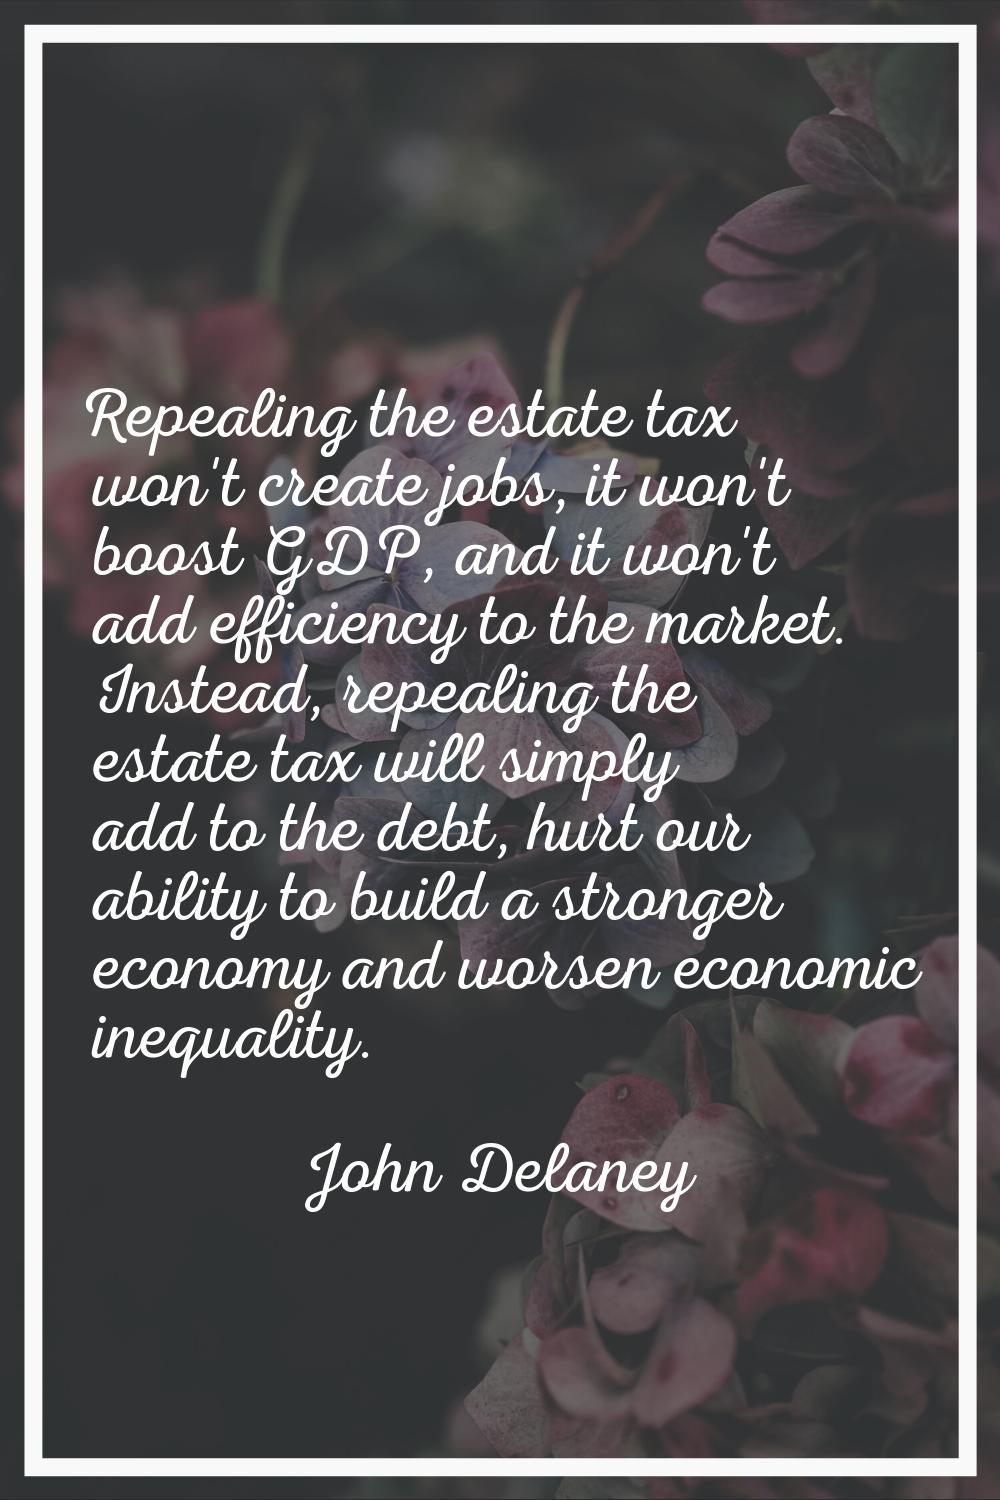 Repealing the estate tax won't create jobs, it won't boost GDP, and it won't add efficiency to the 